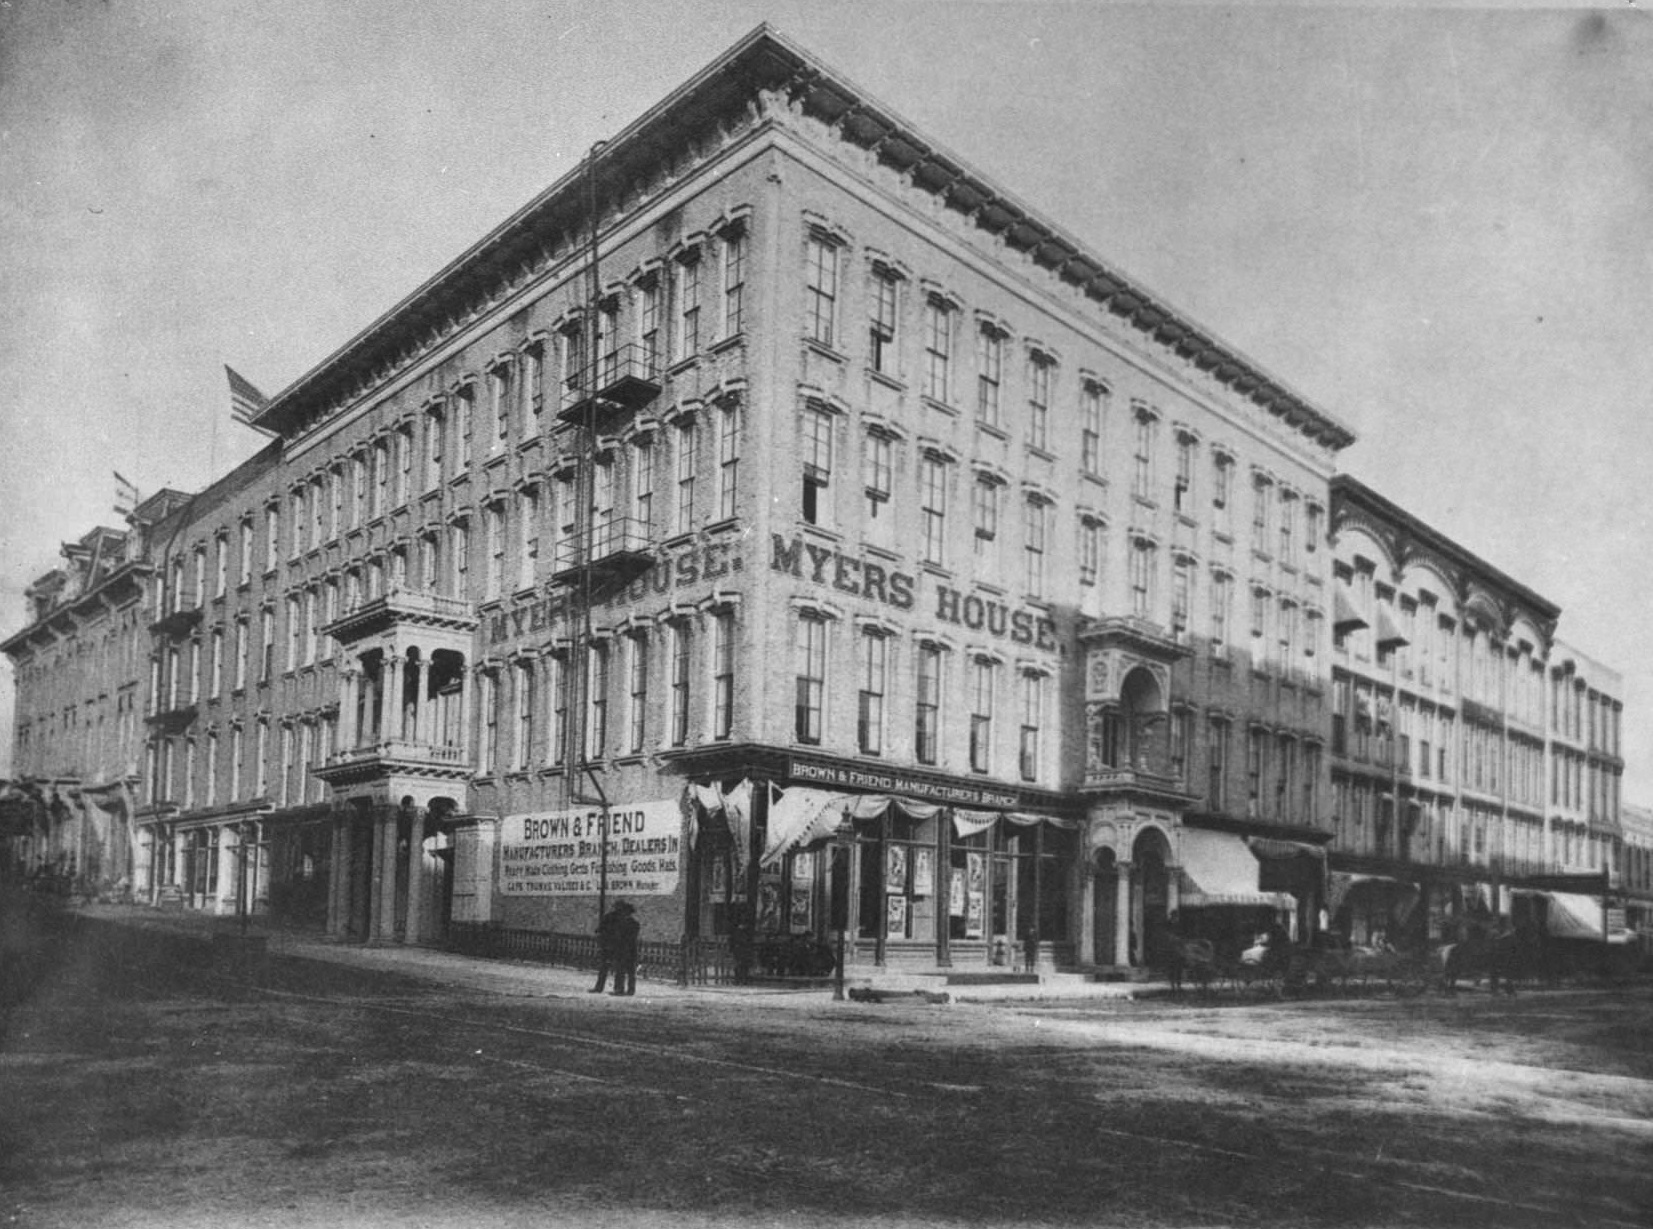 Myers House Hotel built in 1859 on the corner of Main and Milwaukee Streets by Peter Myers. U. S. Grant is said to have stayed overnight at the hotel on September 8, 1870.